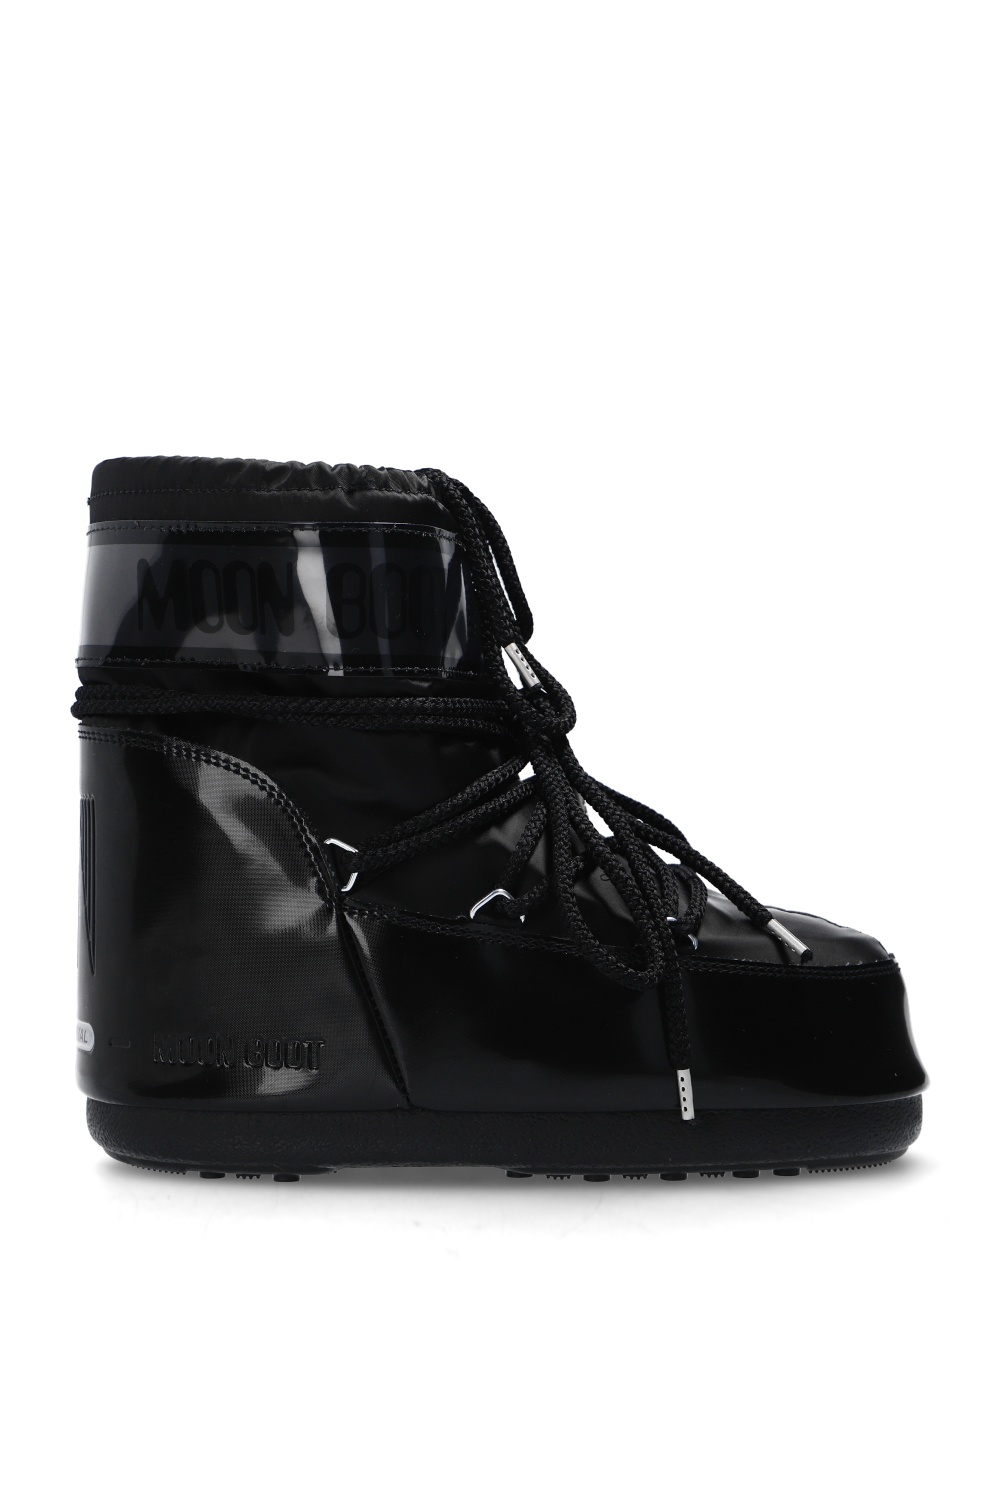 Moon Boot 'Classic Low Glance' snow boots